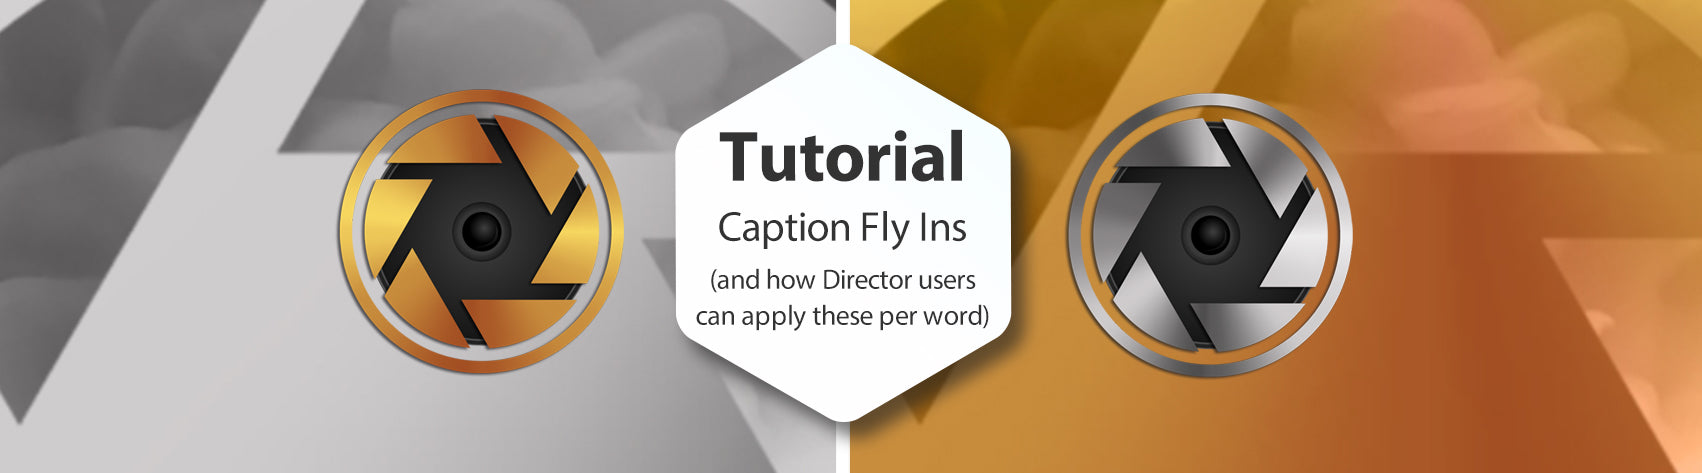 Lesson - Caption Fly In Options